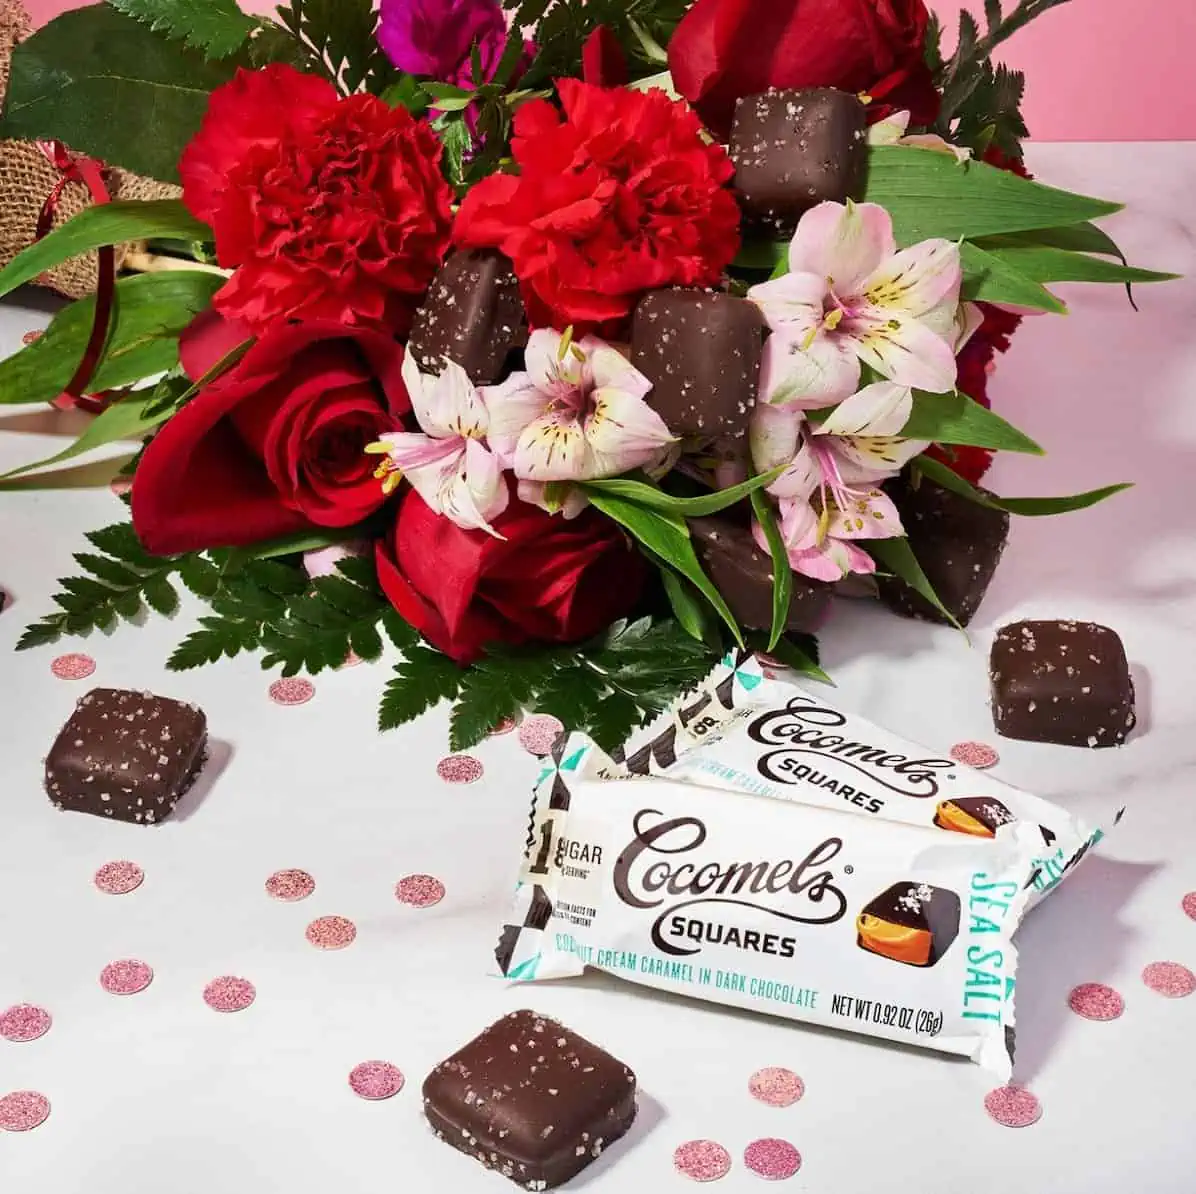 Cocomel squares next to a bouquet of flowers.